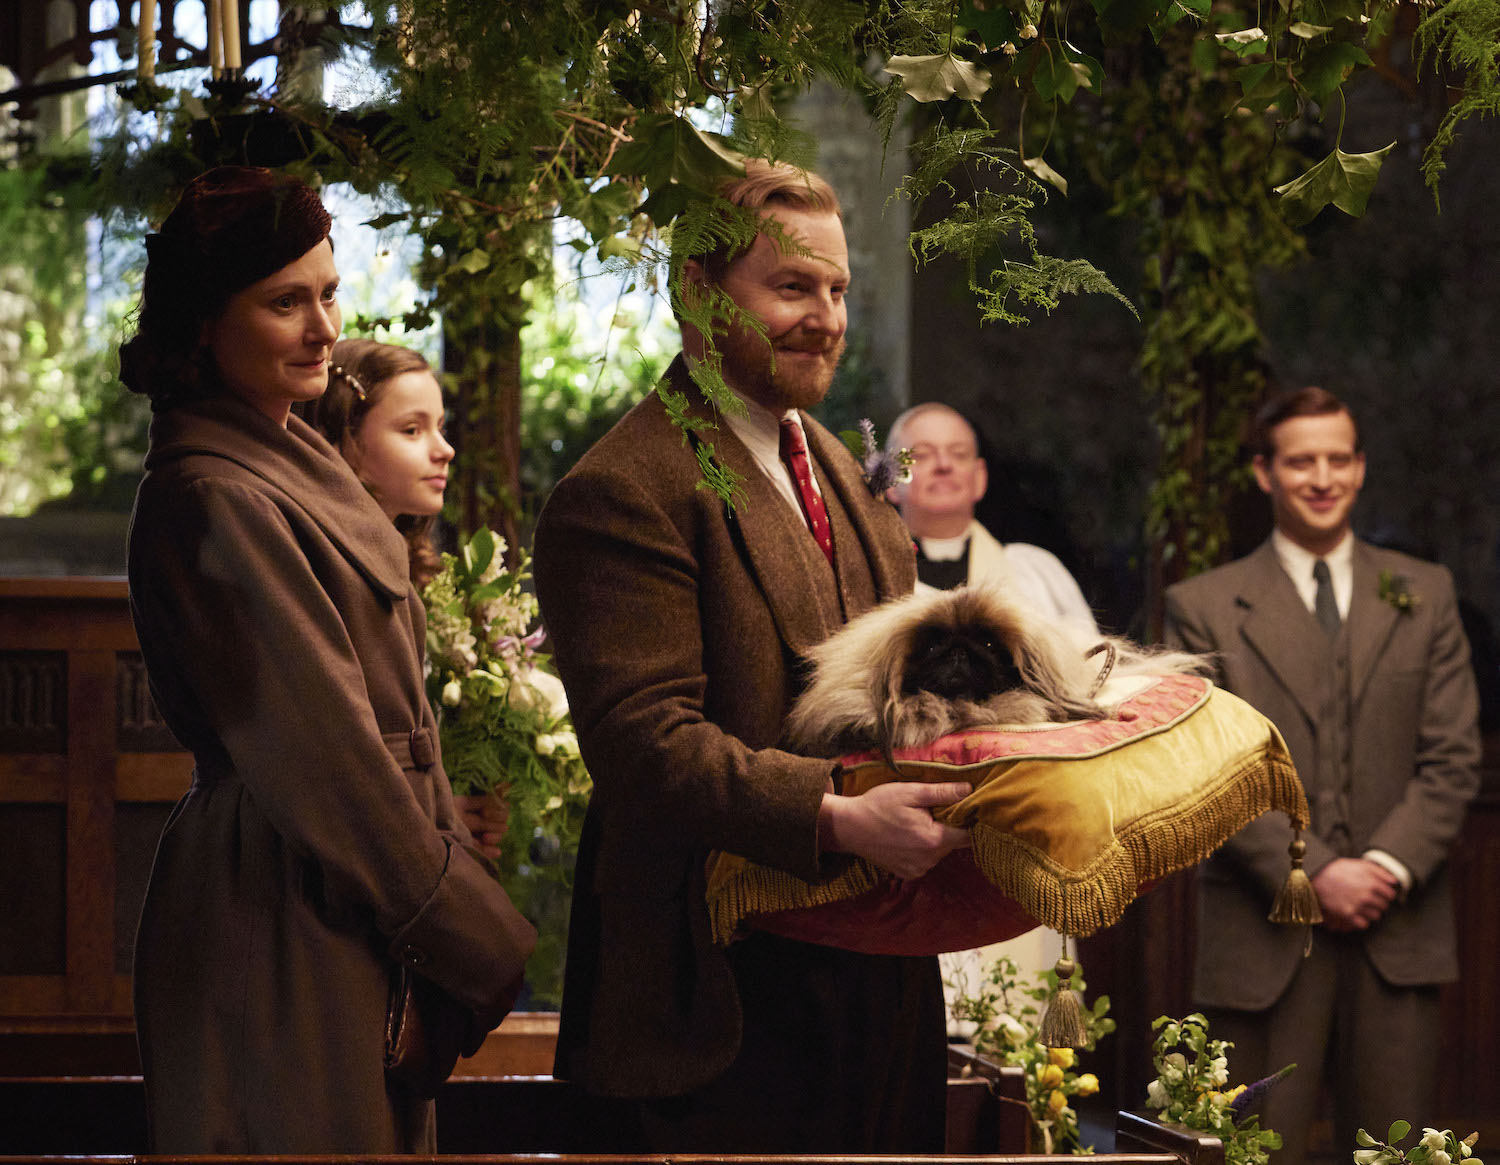 Picture shows: The wedding party. Mrs. Hall (Anna Madeley), Rachel Shenton (Imogen Clawsen), Siegfried Farnon (Samuel West), who holds the Pekinese Tricky Woo on a large pillow, and James Herriot (Nicholas Ralph) are finally ready for the wedding to take place.